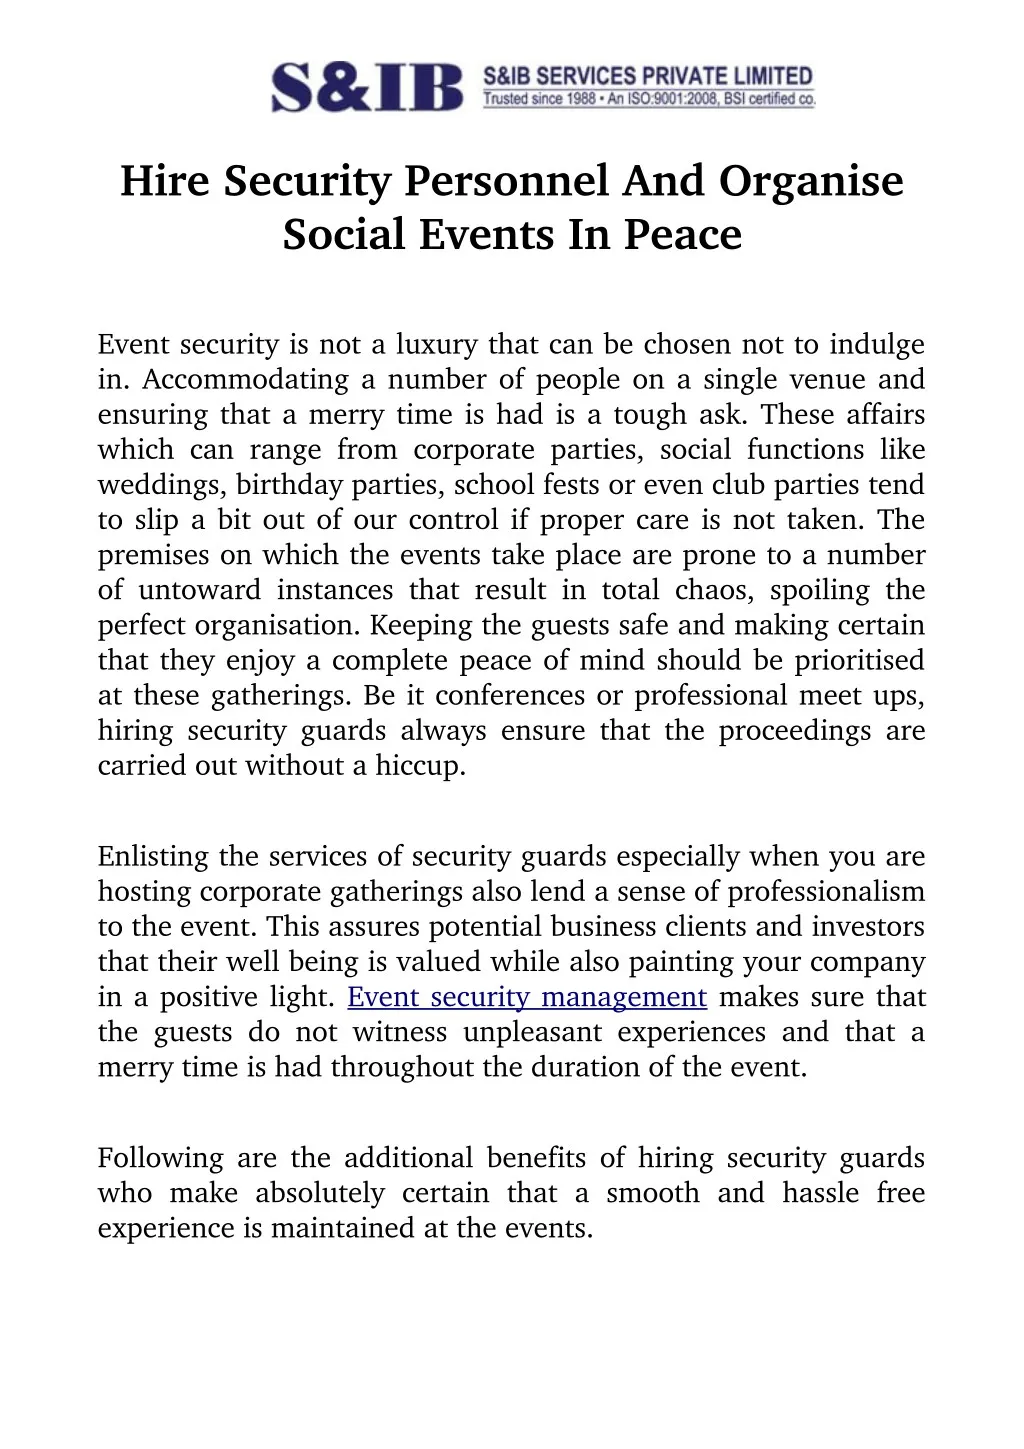 hire security personnel and organise social